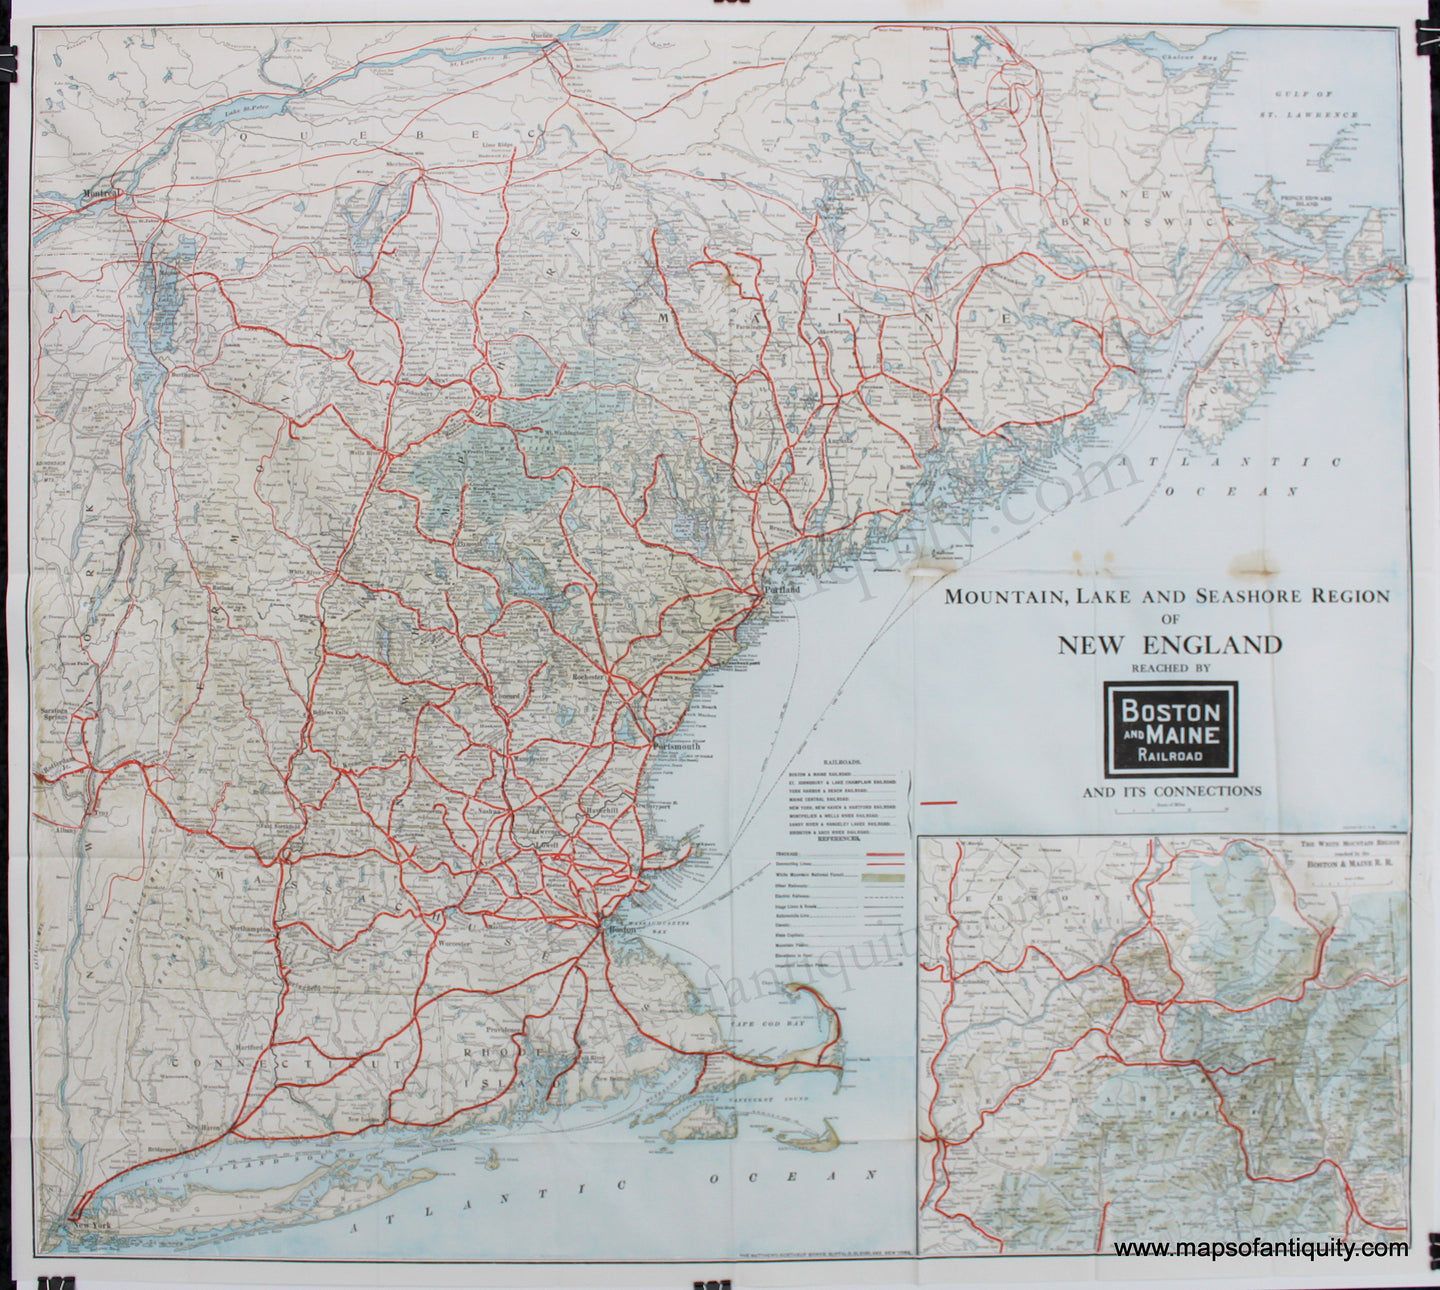 Antique-Railroad-Map-Mountain-Lake-and-Seashore-Region-of-New-England-Reached-by-Boston-and-Maine-Railroad-and-its-Connections-United-States-Northeast-1923-Boston-and-Maine-Railroad-Maps-Of-Antiquity